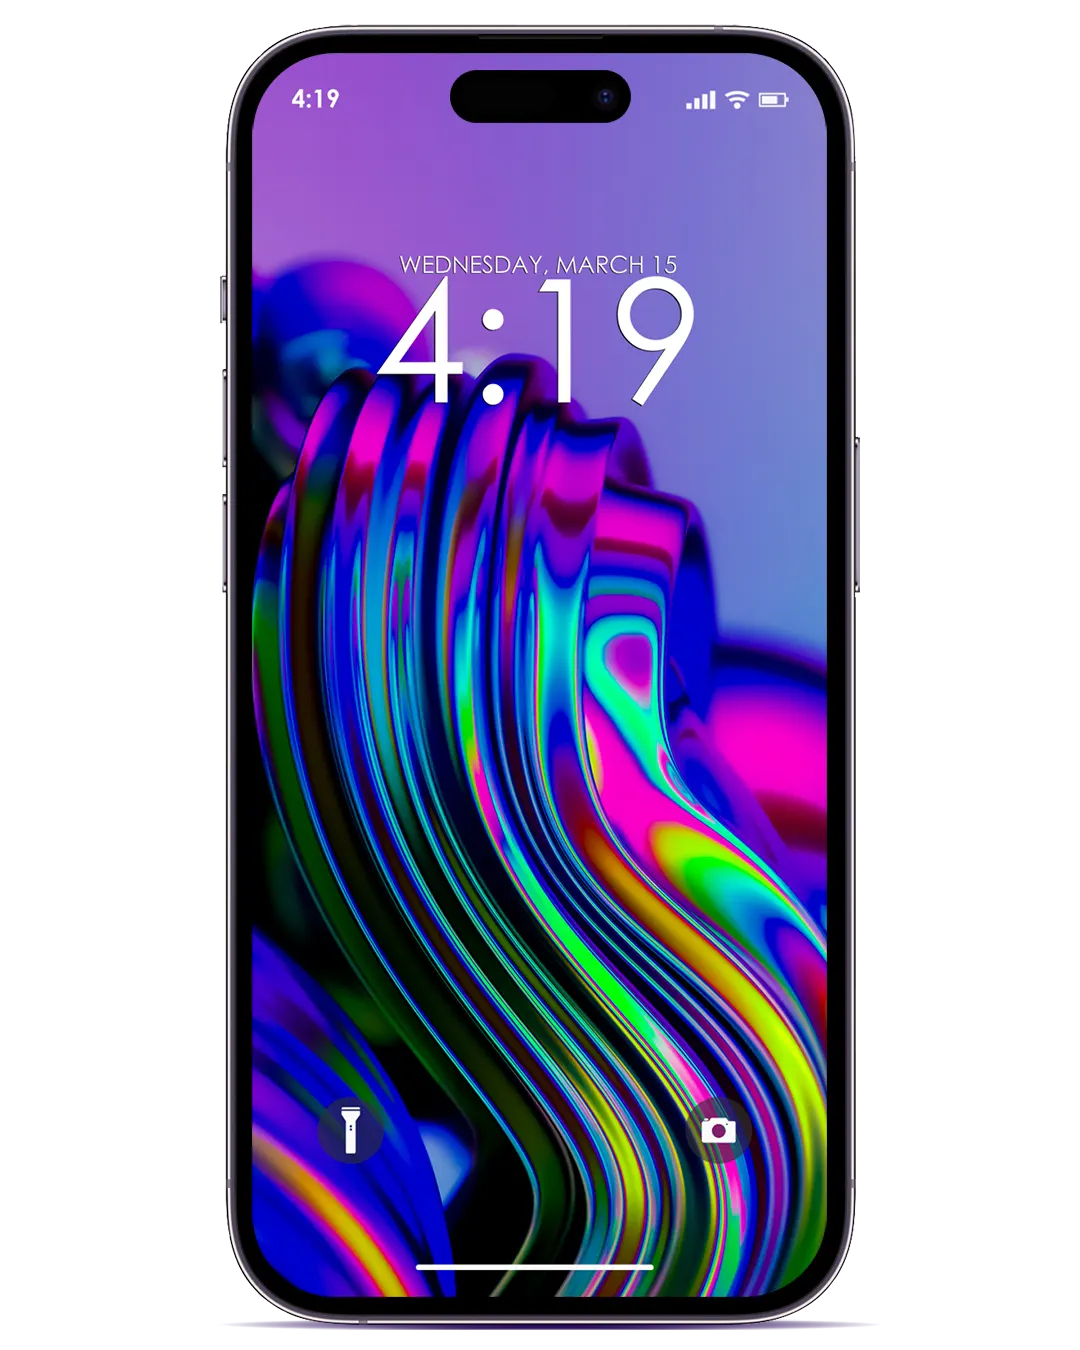 iPhone Wallpapers to interact with iOS 16 clock widget